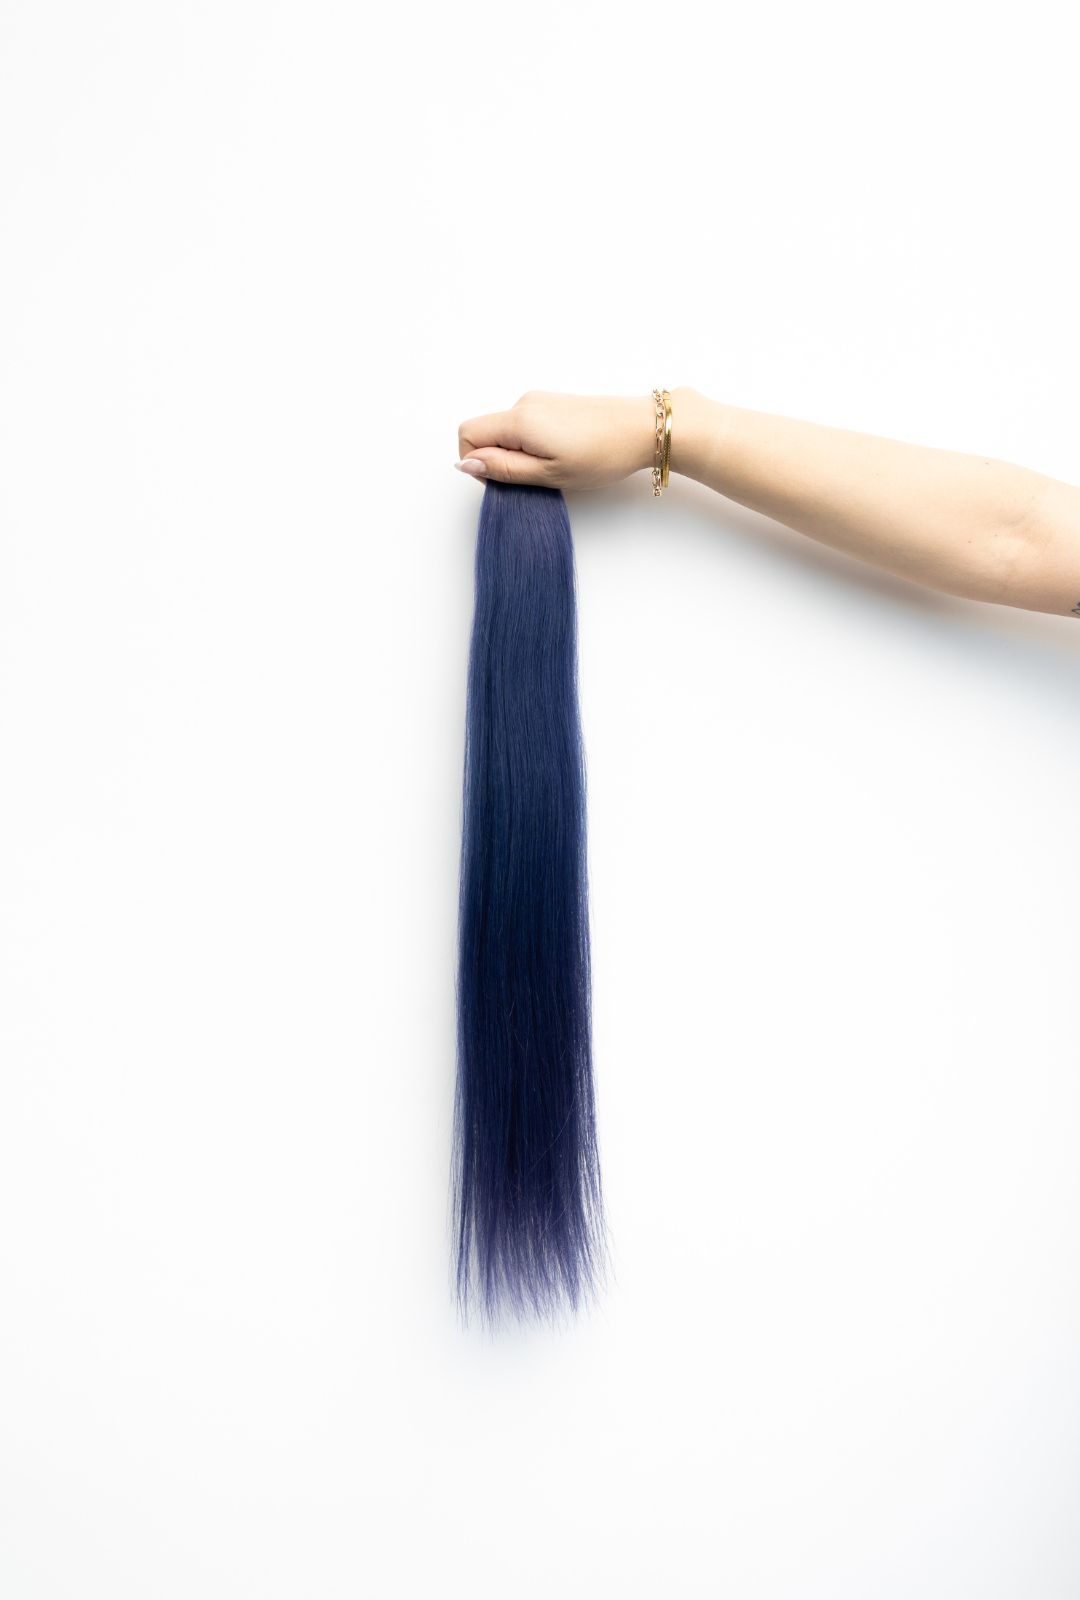 Laced Hair Tape-In Extensions Blue